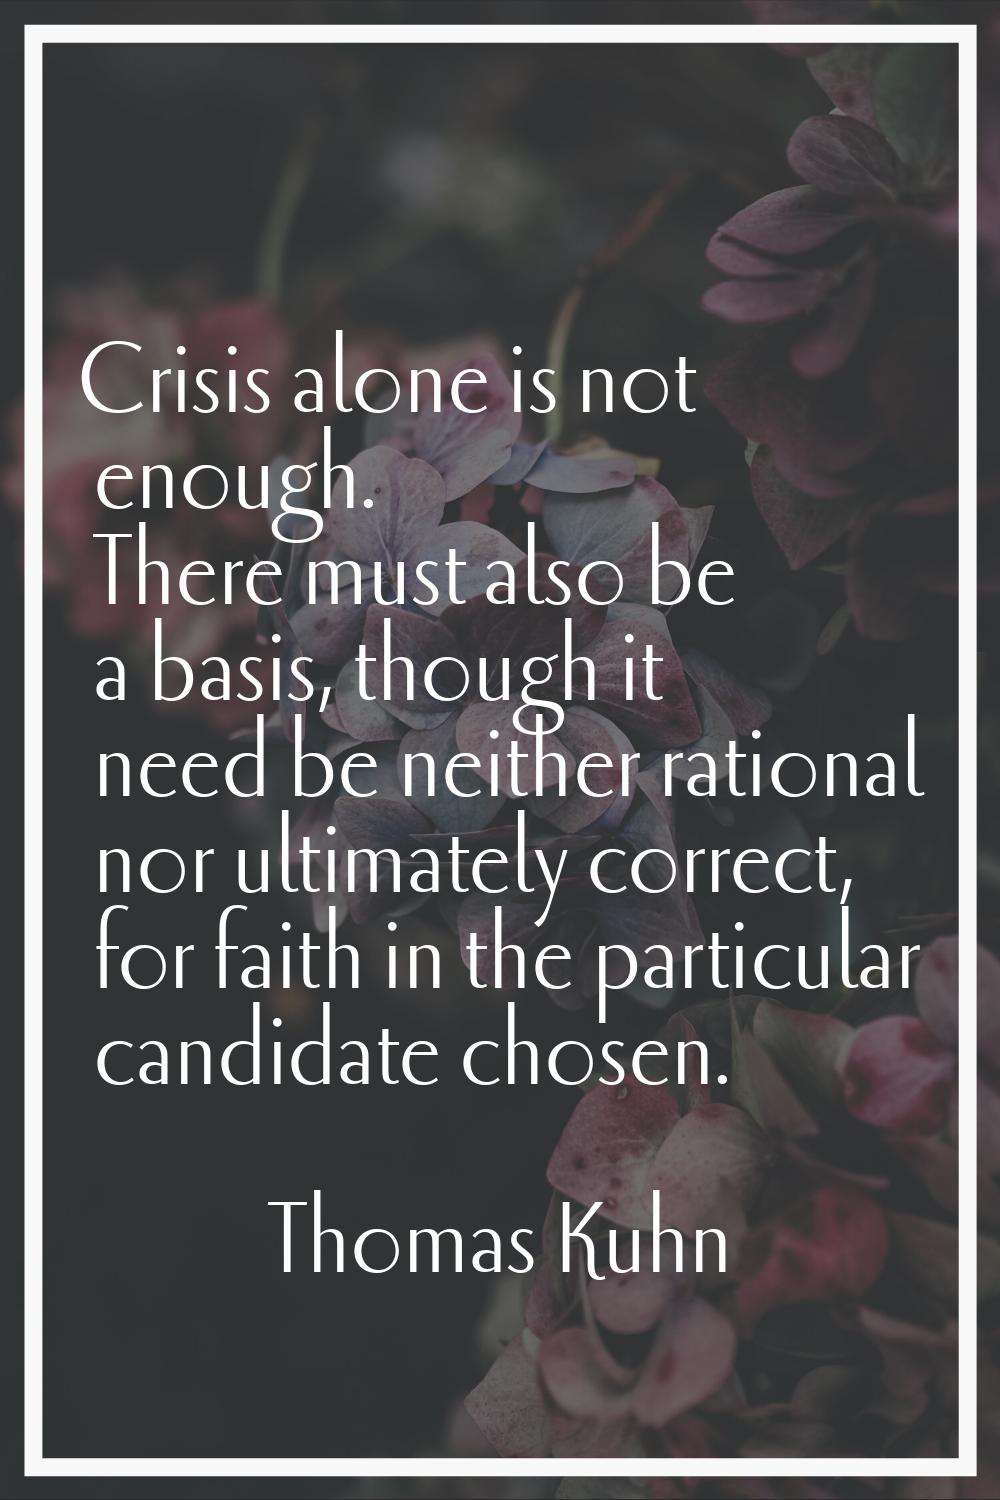 Crisis alone is not enough. There must also be a basis, though it need be neither rational nor ulti